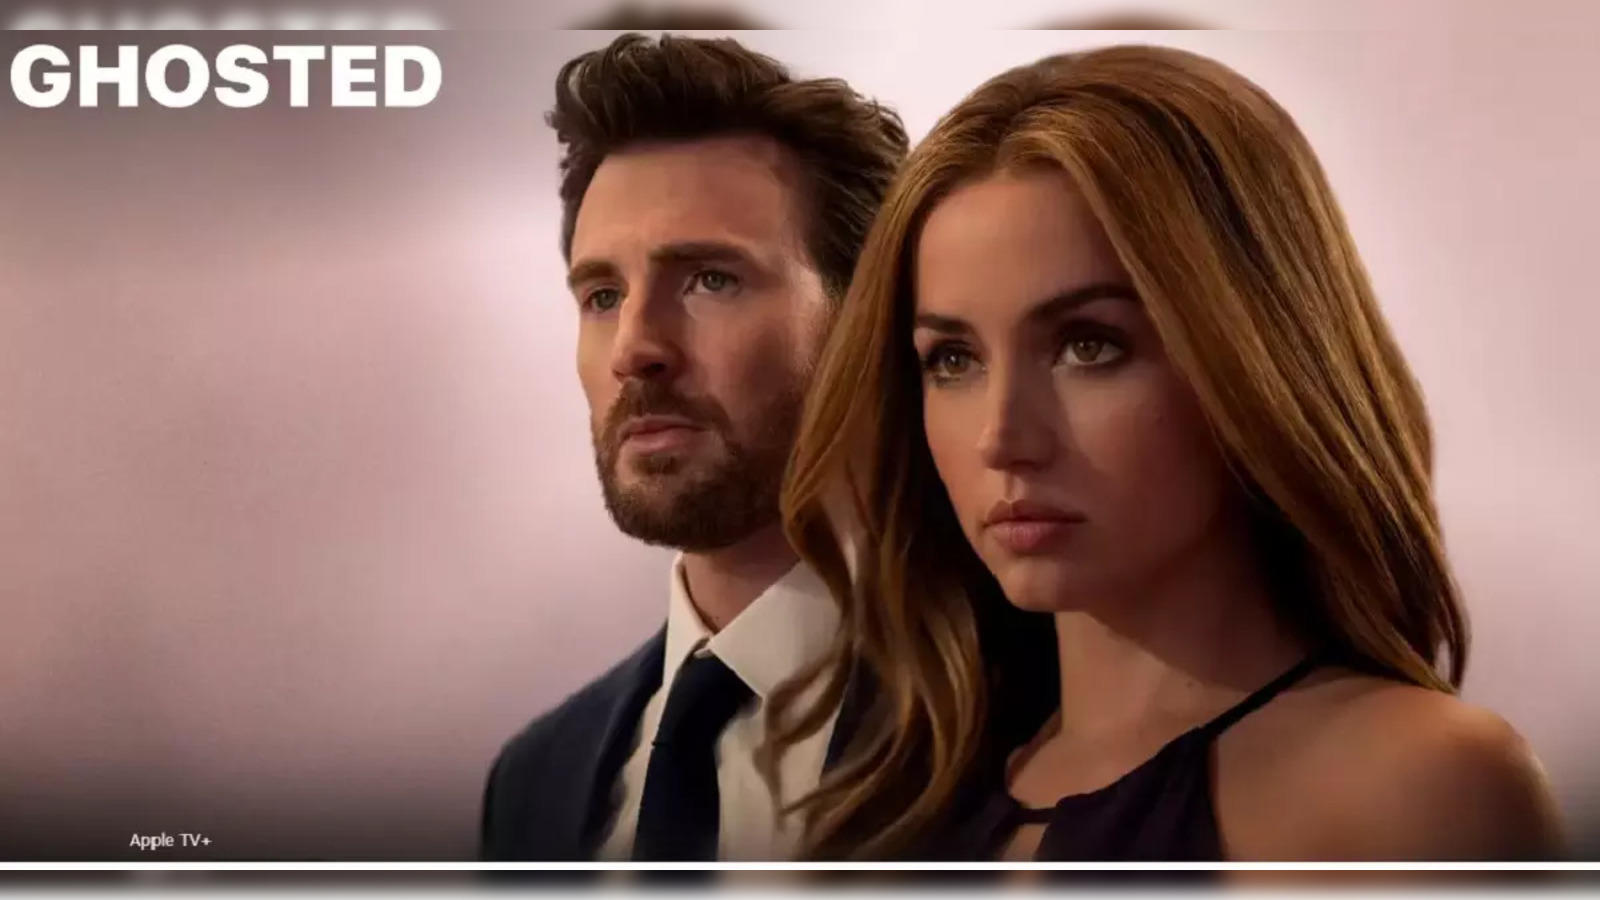 Chris Evans and Ana de Armas together again in Apple TV's 'Ghosted' - AS USA